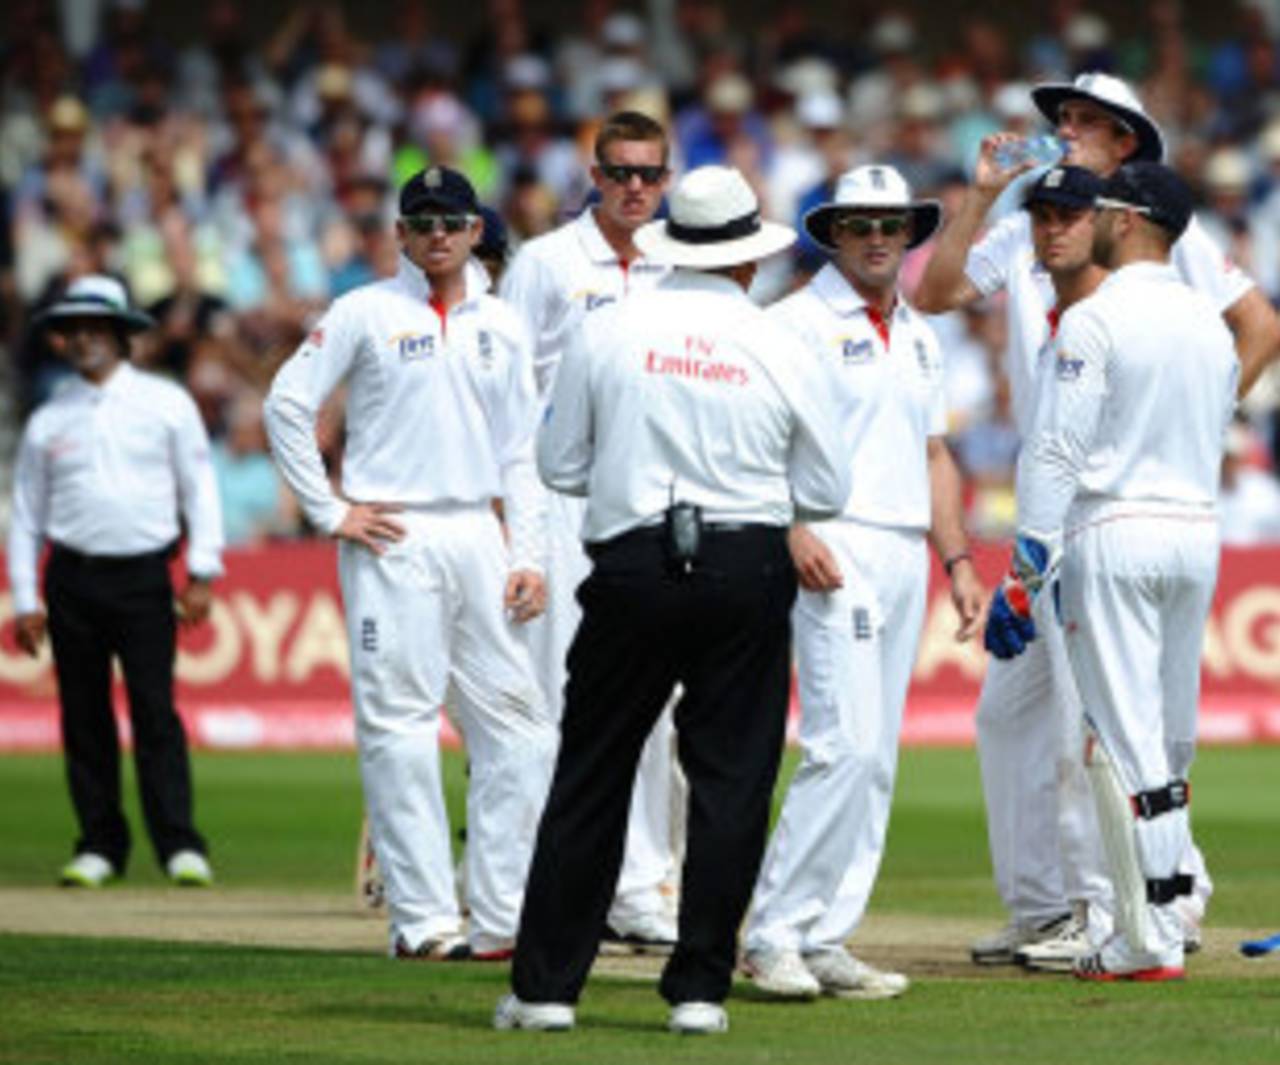 England's players talk to the umpire after a failed review, England v India, 2nd npower Test, Trent Bridge, 2nd day, July 30, 2011